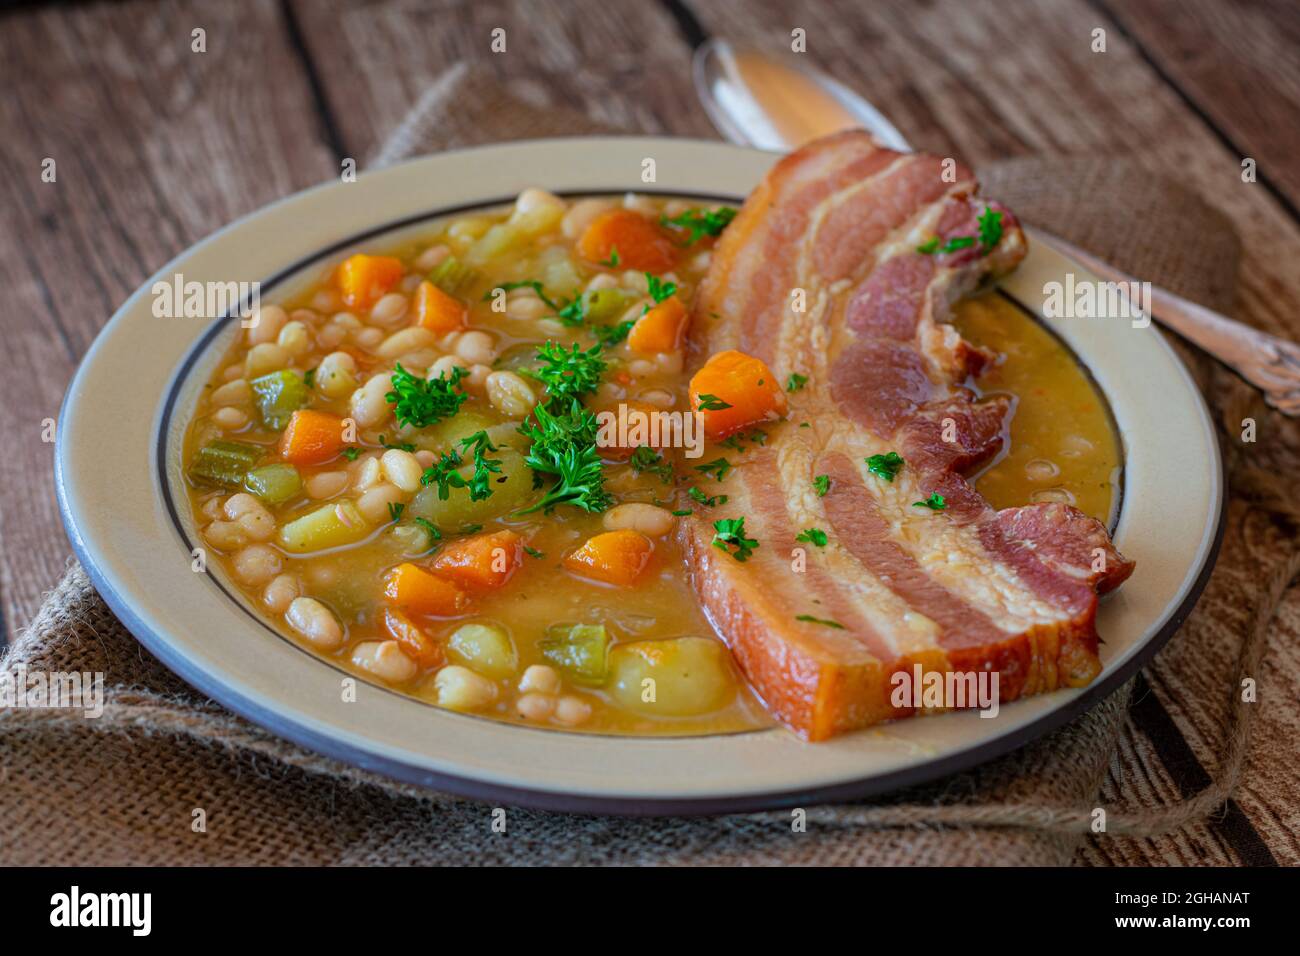 Rustic stew with white beans, root vegetables and pork belly on wooden table Stock Photo